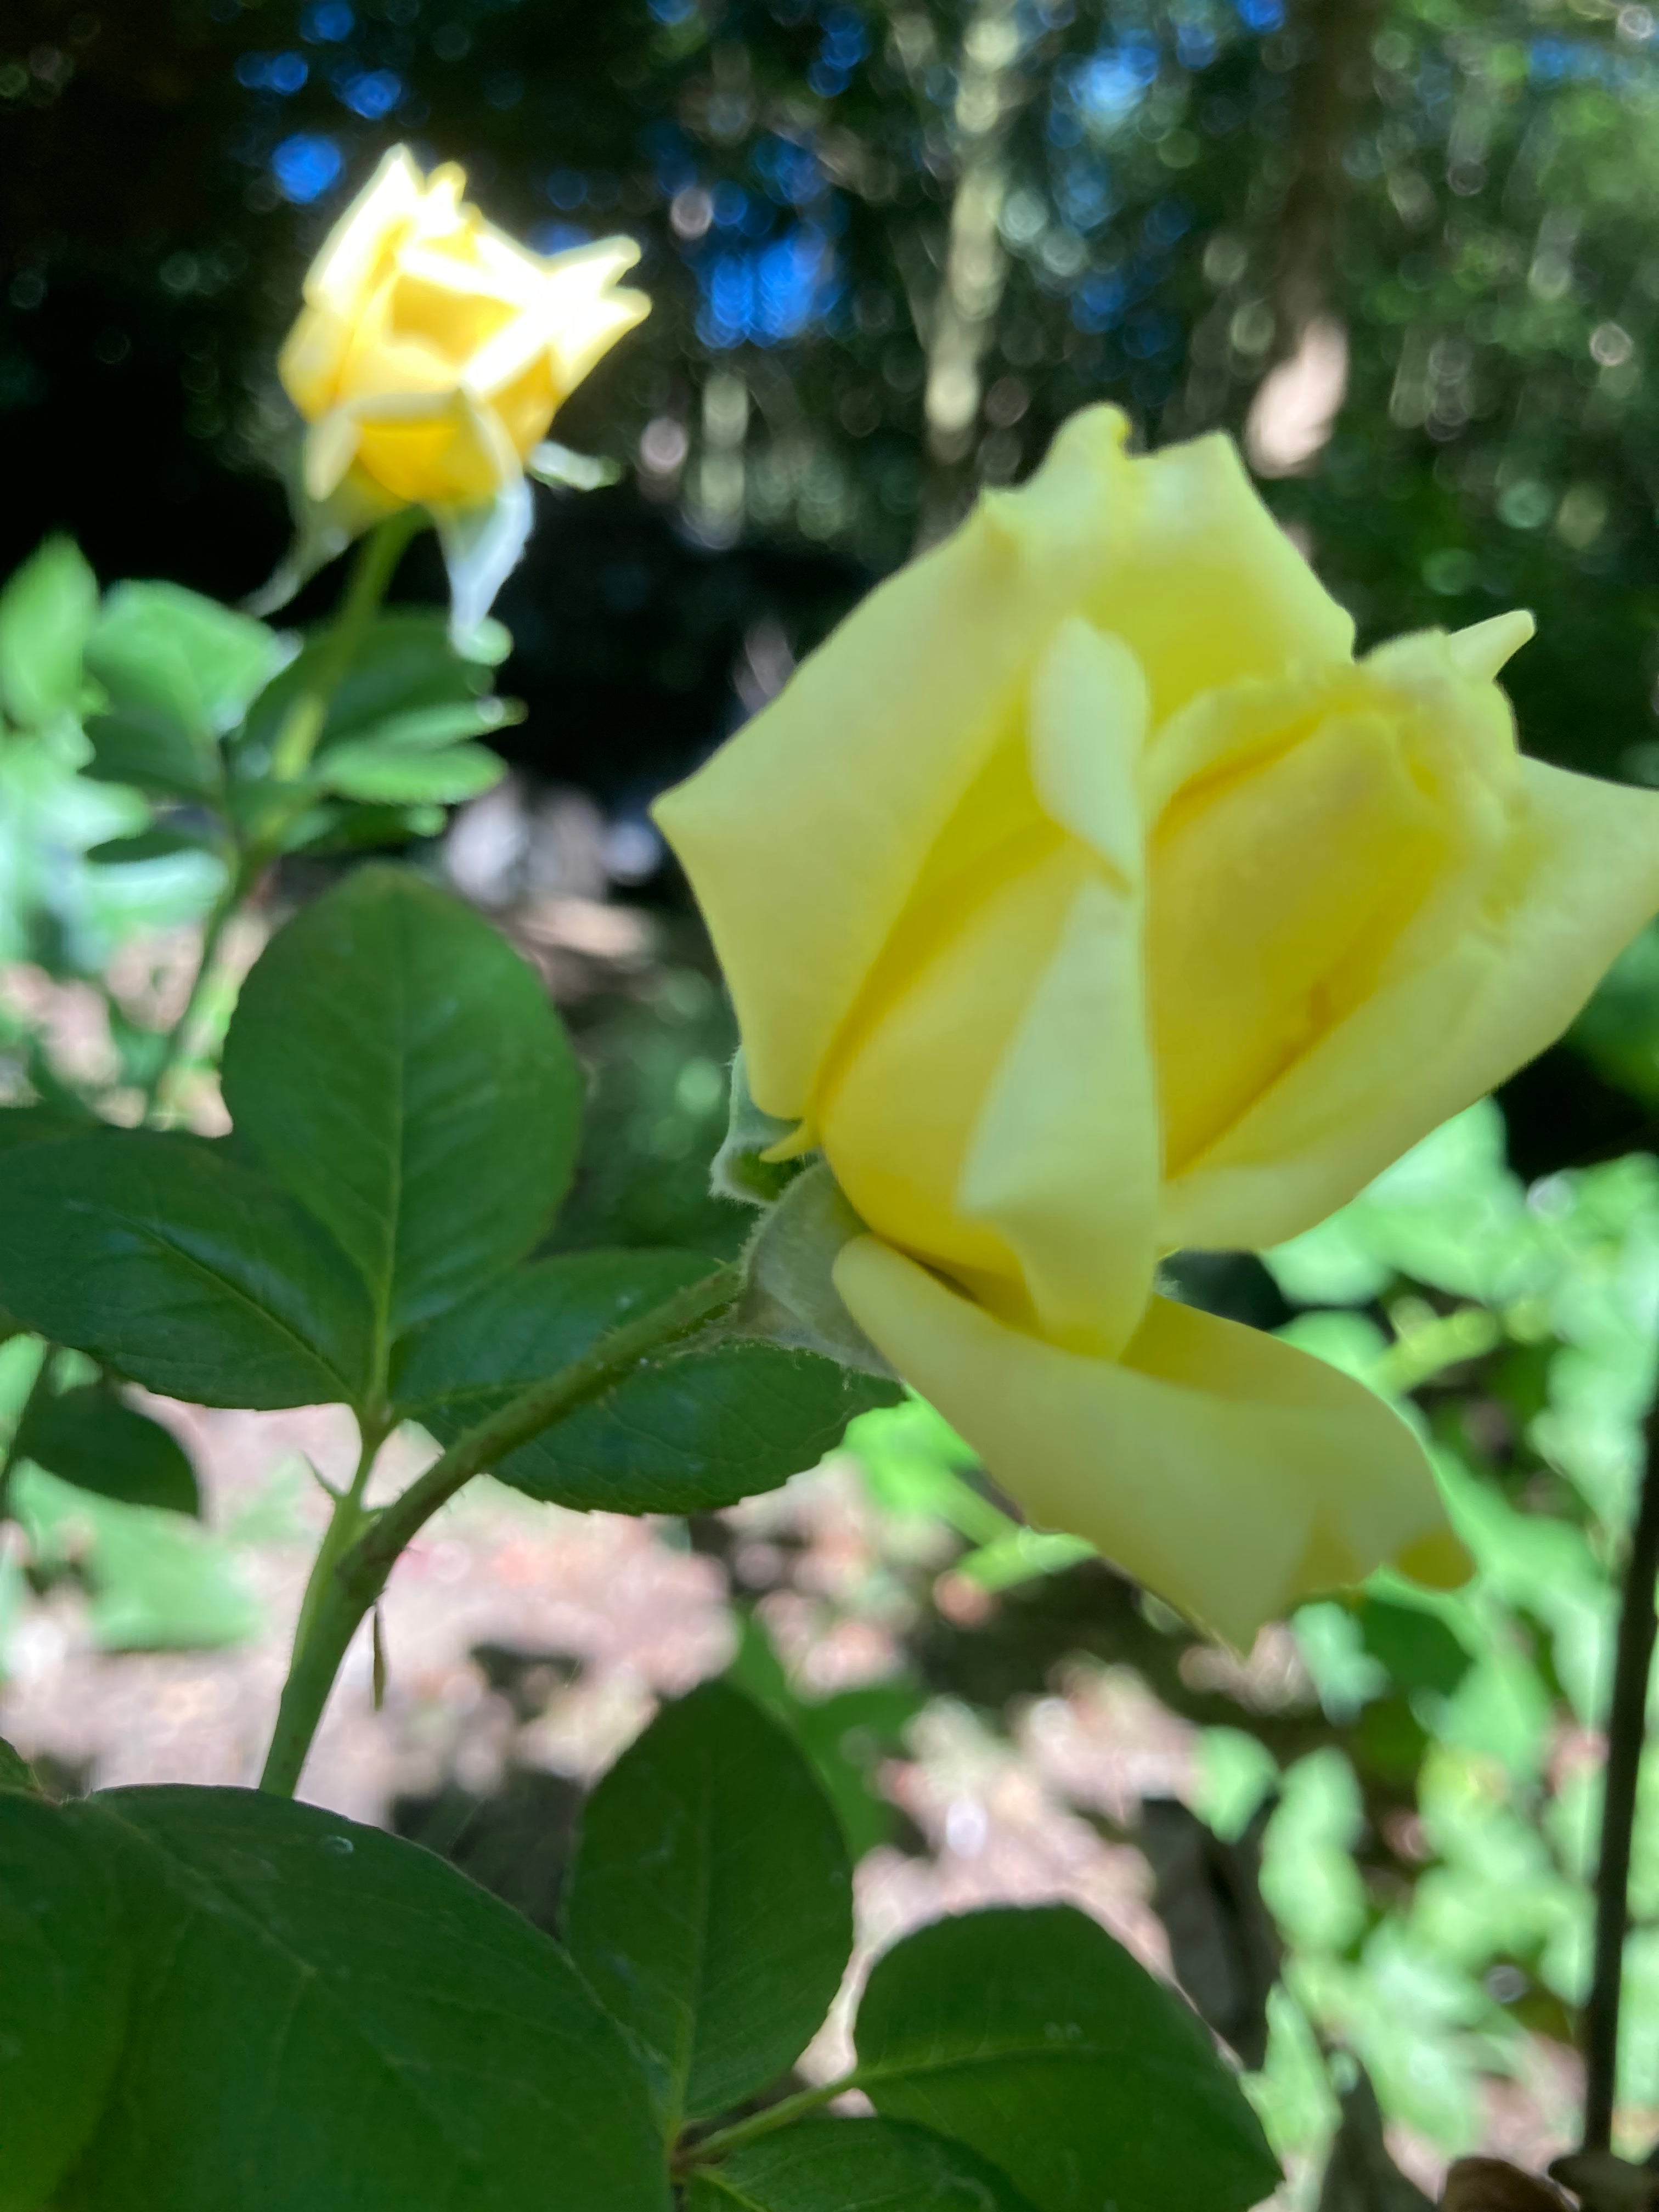 Yellow 'Sunblest' Hybrid T Rose (Bare Root) Free UK Postage